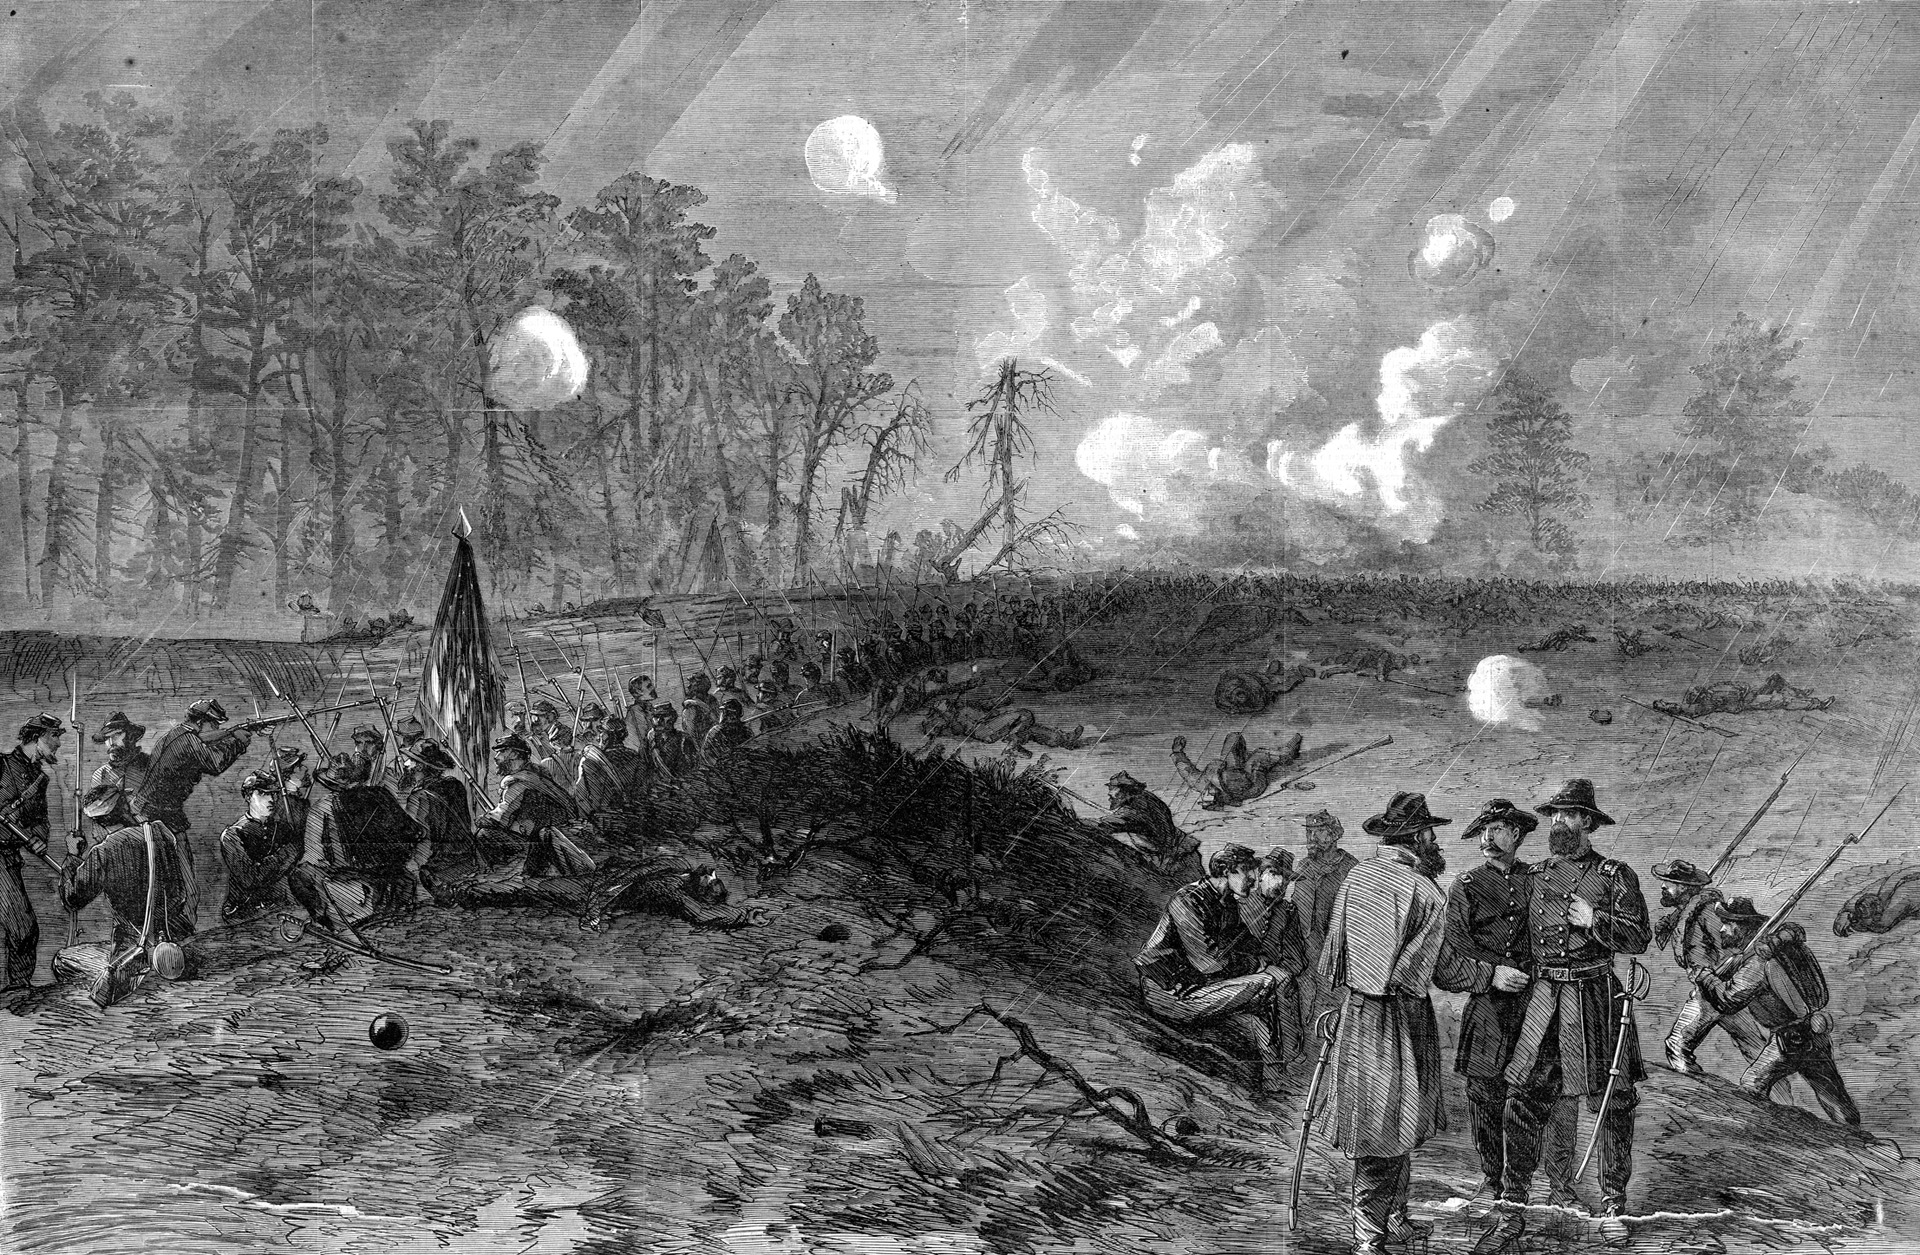 The Overland Campaign of 1864 was marked by the regular use of earthworks by the Confederates as they defended positions against greater numbers. The grim fighting at the Mule Shoe Salient resulted in 17,000 casualties.